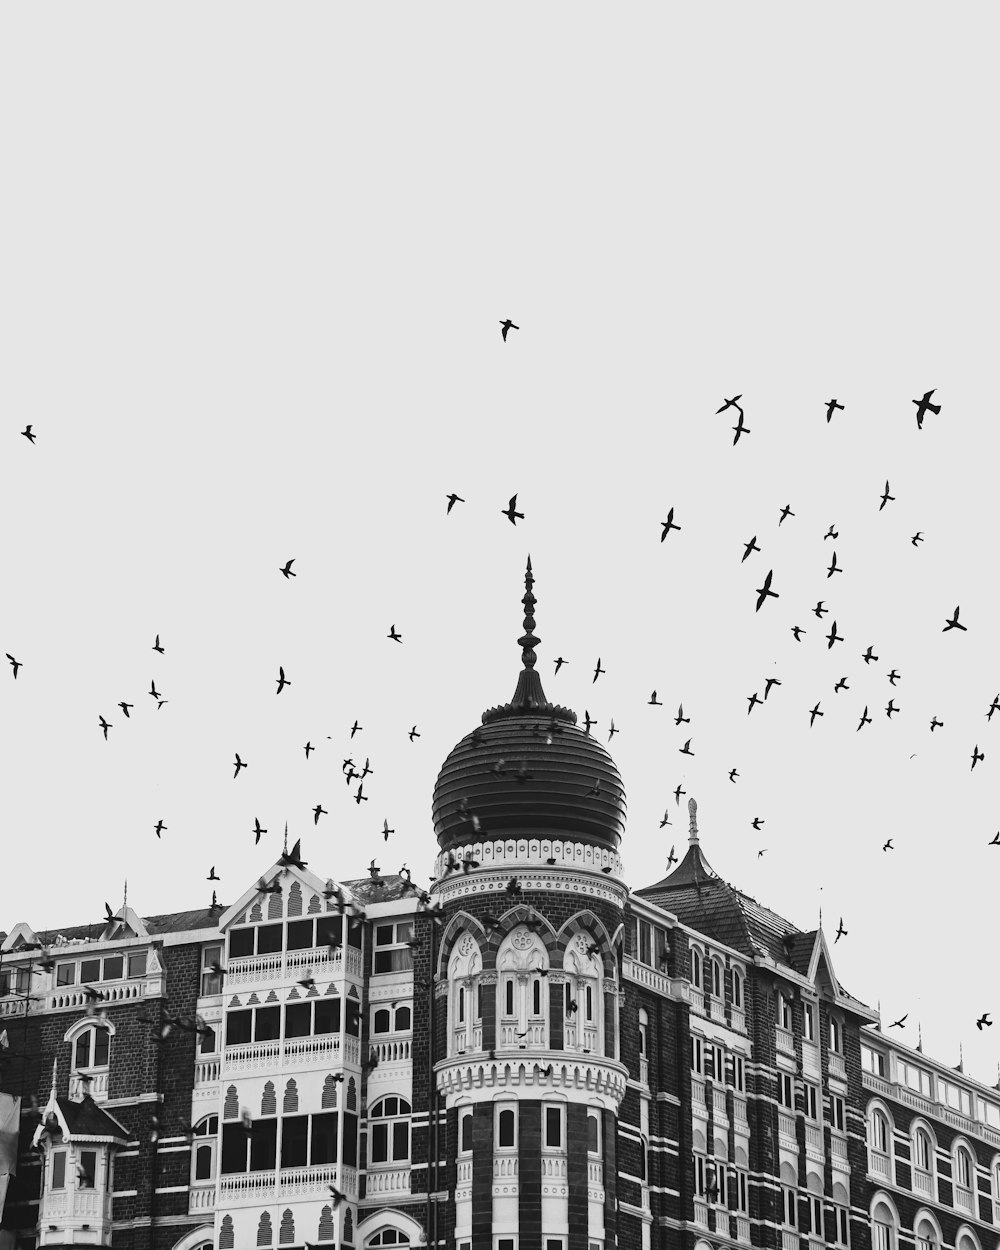 flock of birds flying over the building in grayscale photography